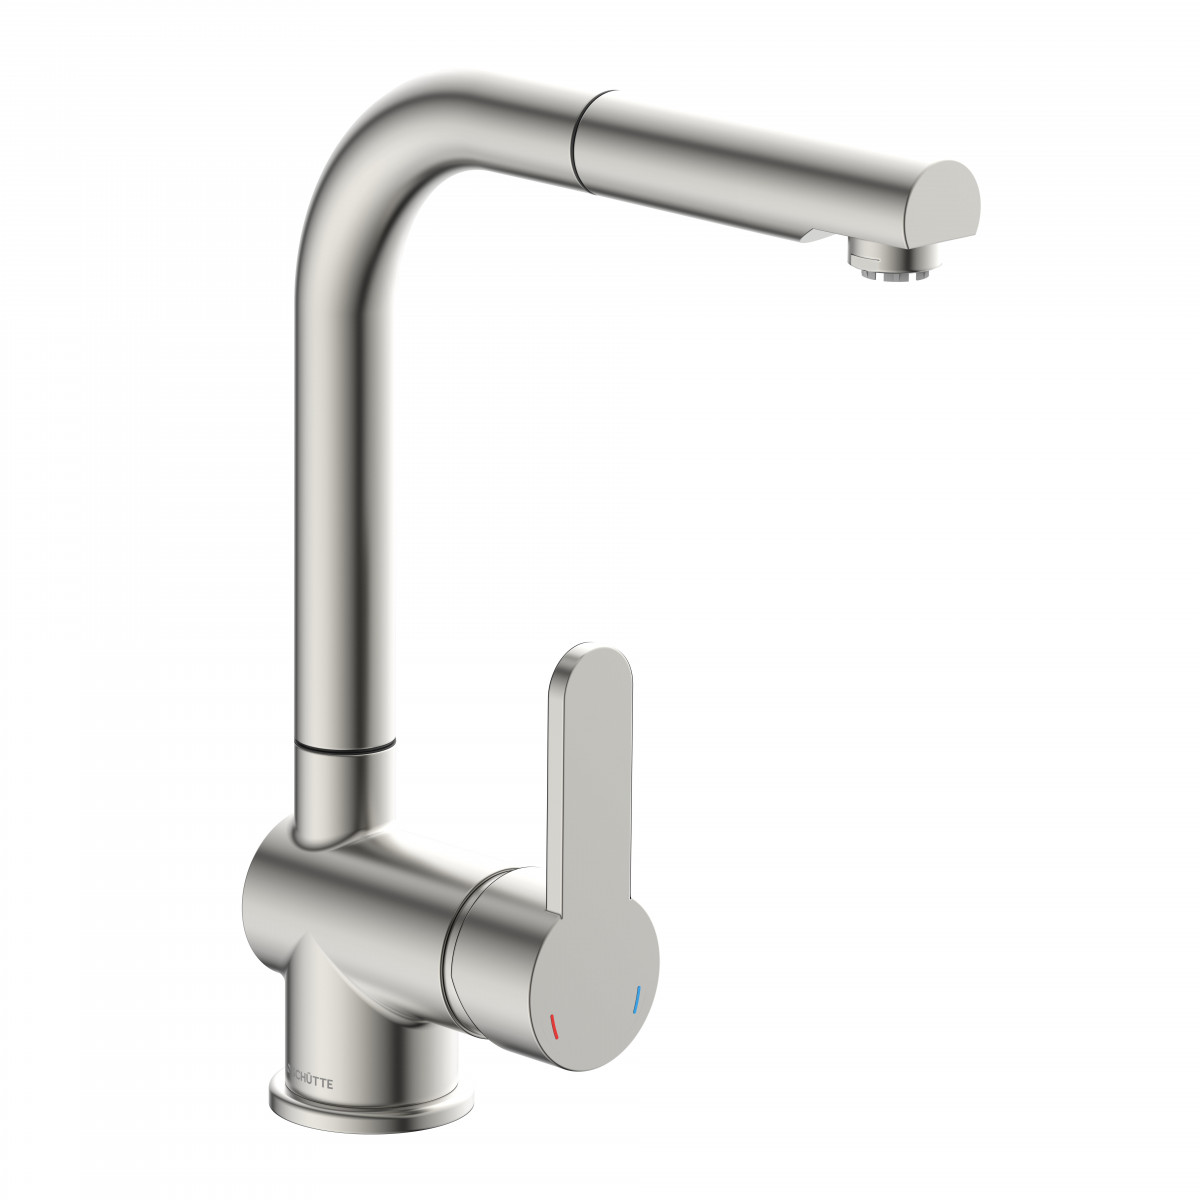 LONDON Sink mixer low pressure, stainless steel look, with pull-out spout